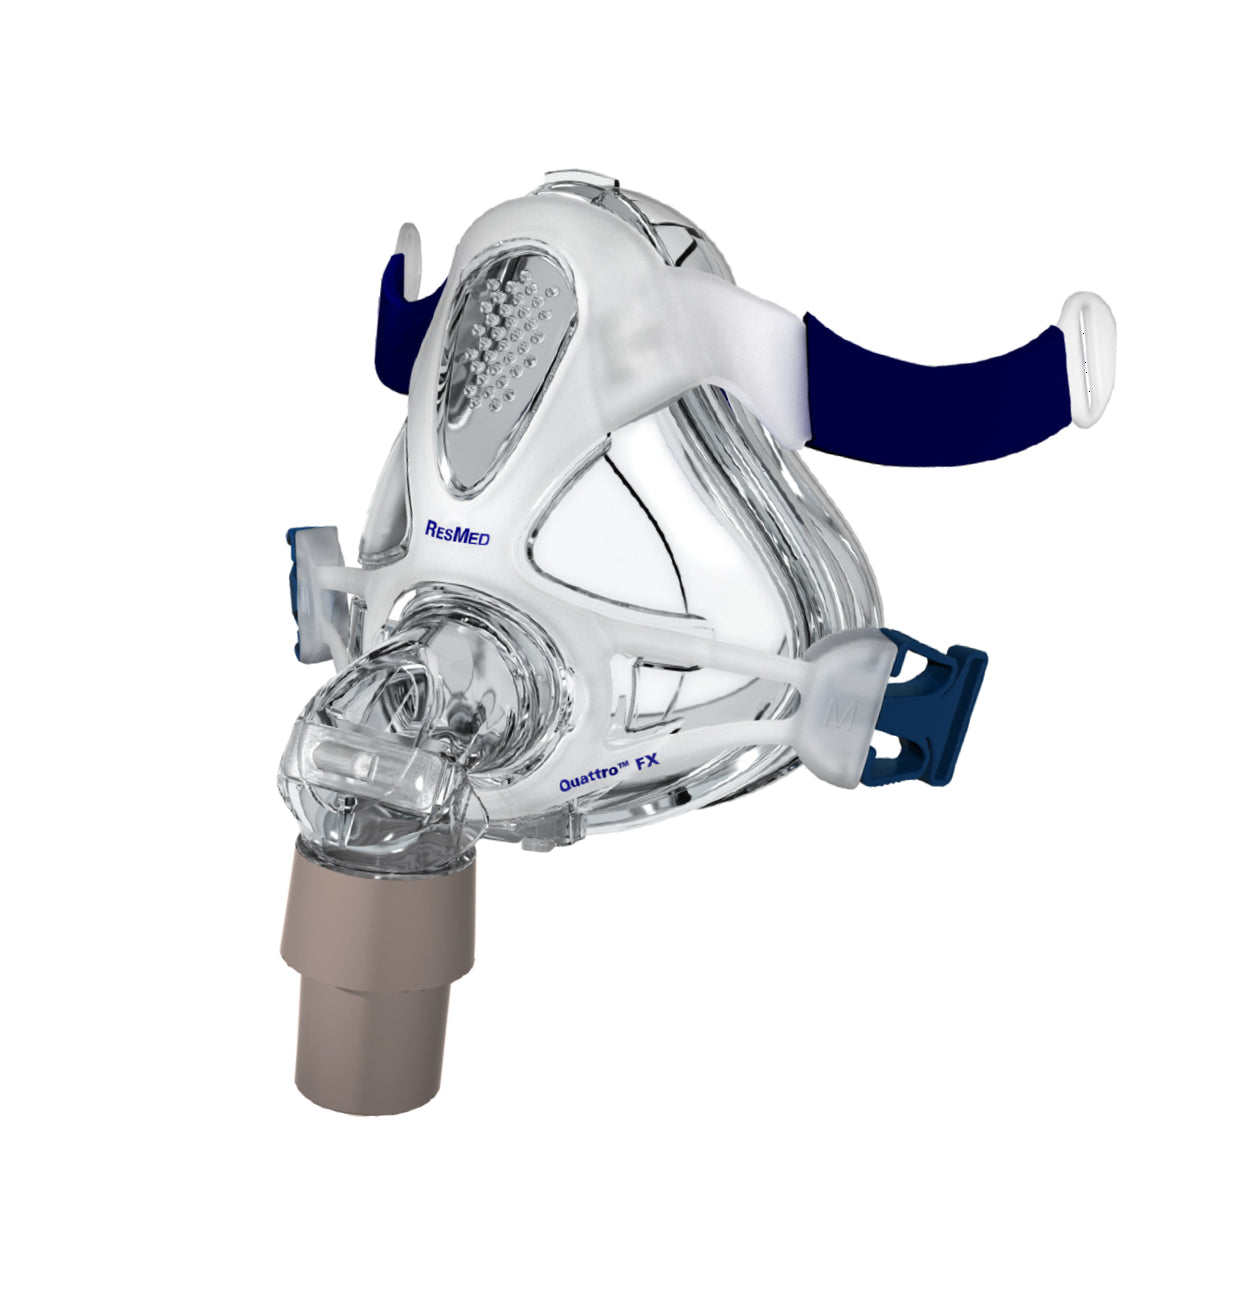 ResMed Quattro FX Full Face Mask Frame System with Cushion - no headgear